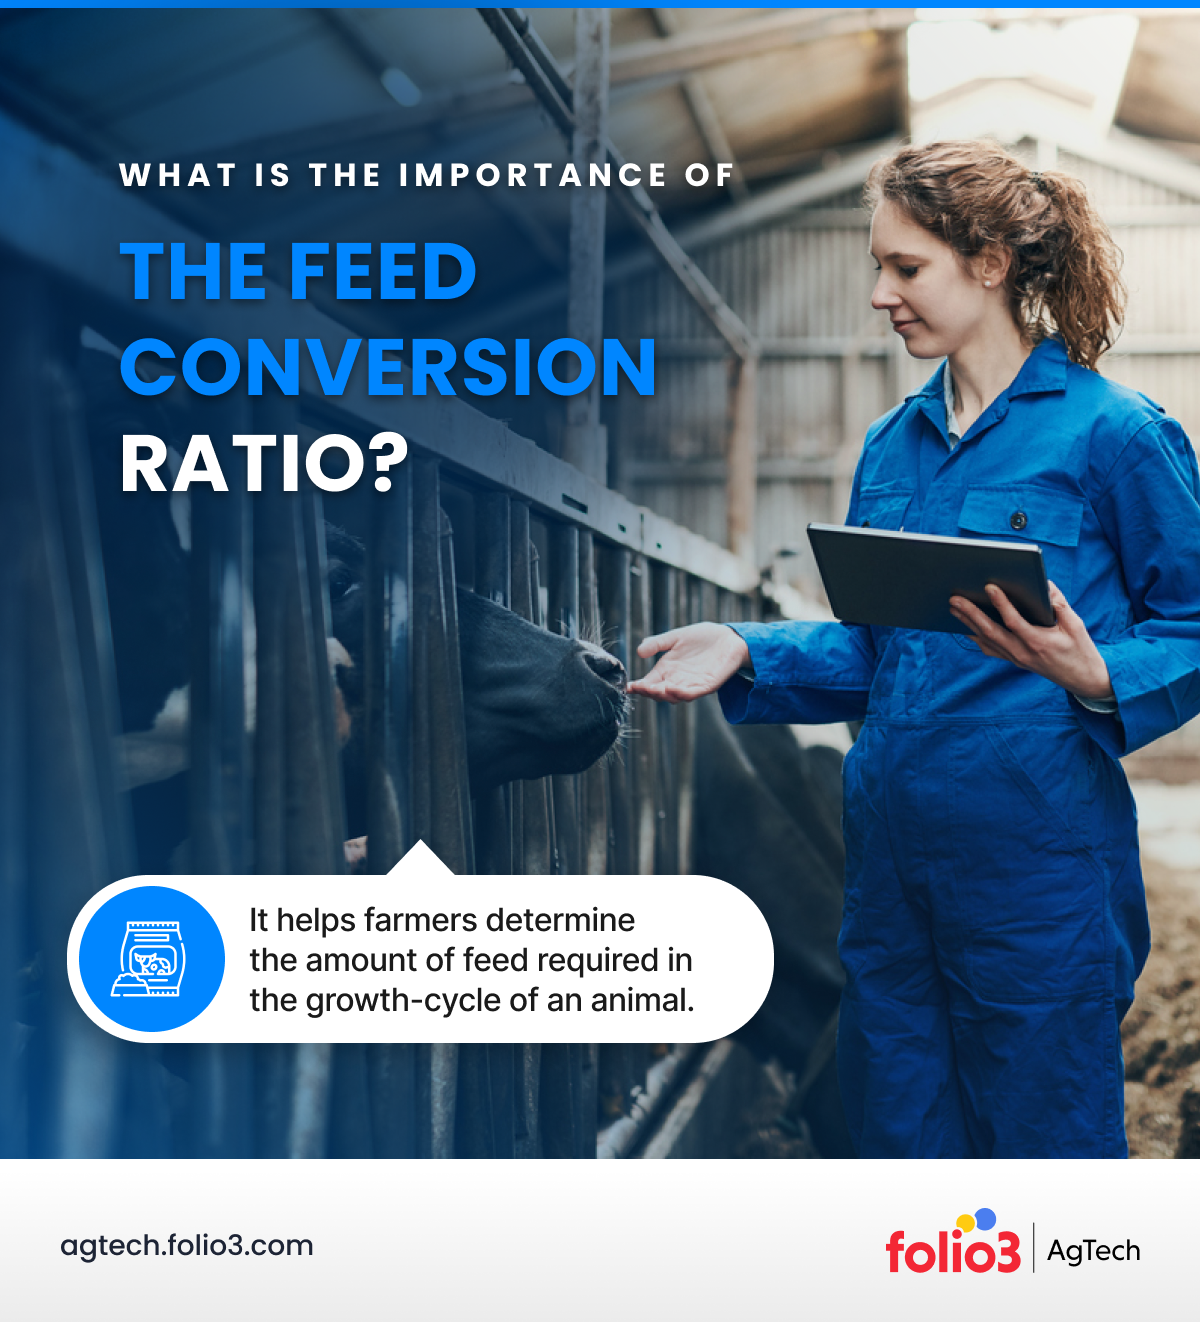 the feed conversion ratio